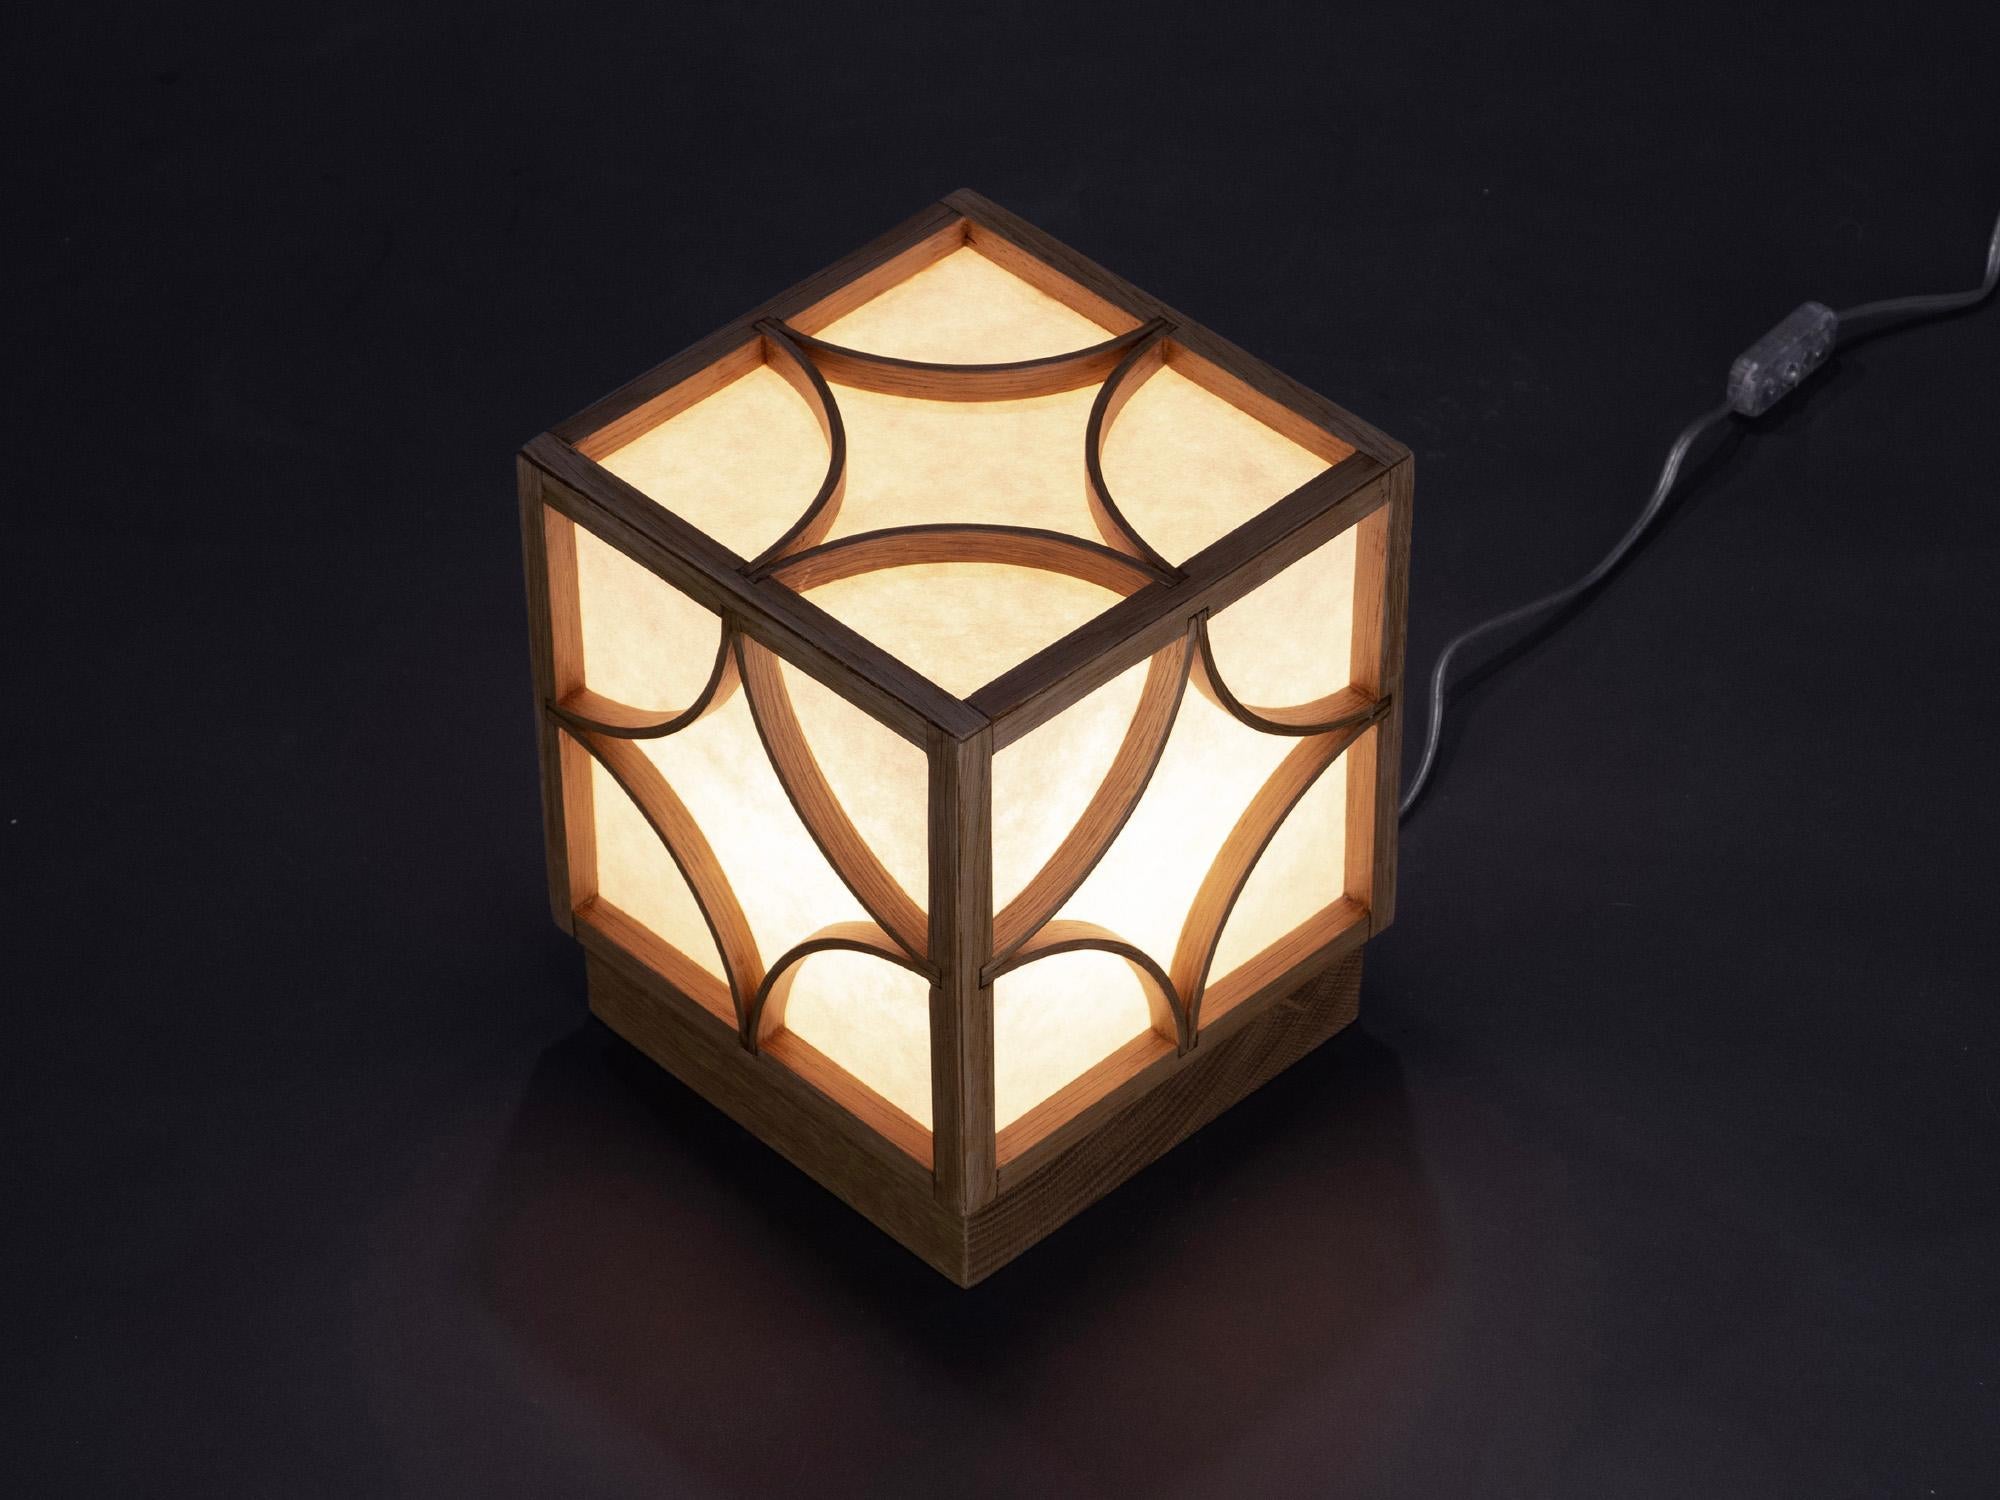 The Table Lamp is constructed from steam-bent white oak forming a cubed frame that stands on a solid white oak base. The solid white oak base can be removed easily for cleaning and bulb changing. The lamp provides a diffuse light through the